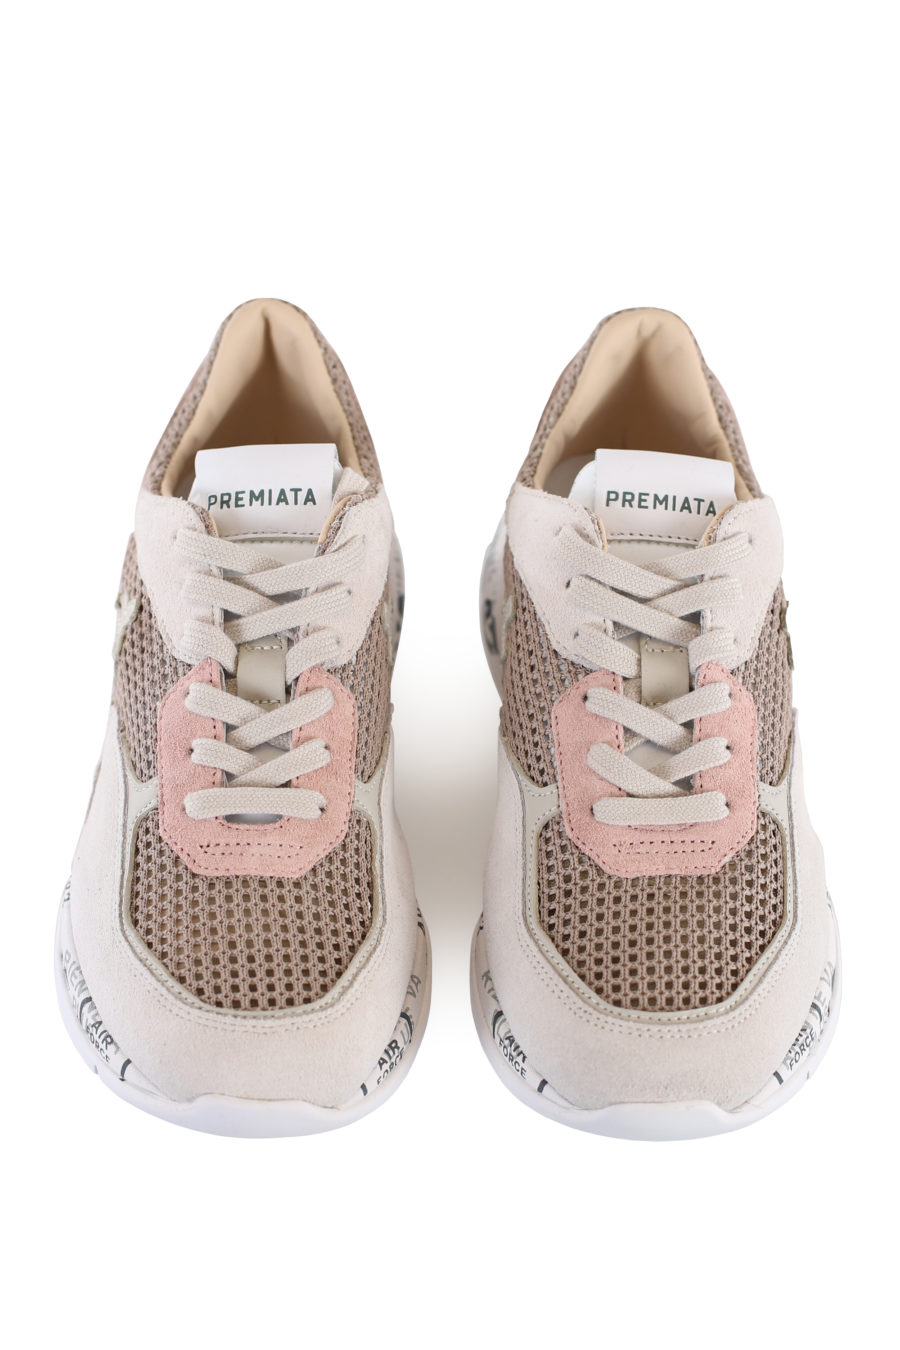 Earth coloured trainers with pink details in openwork fabric - IMG 1655